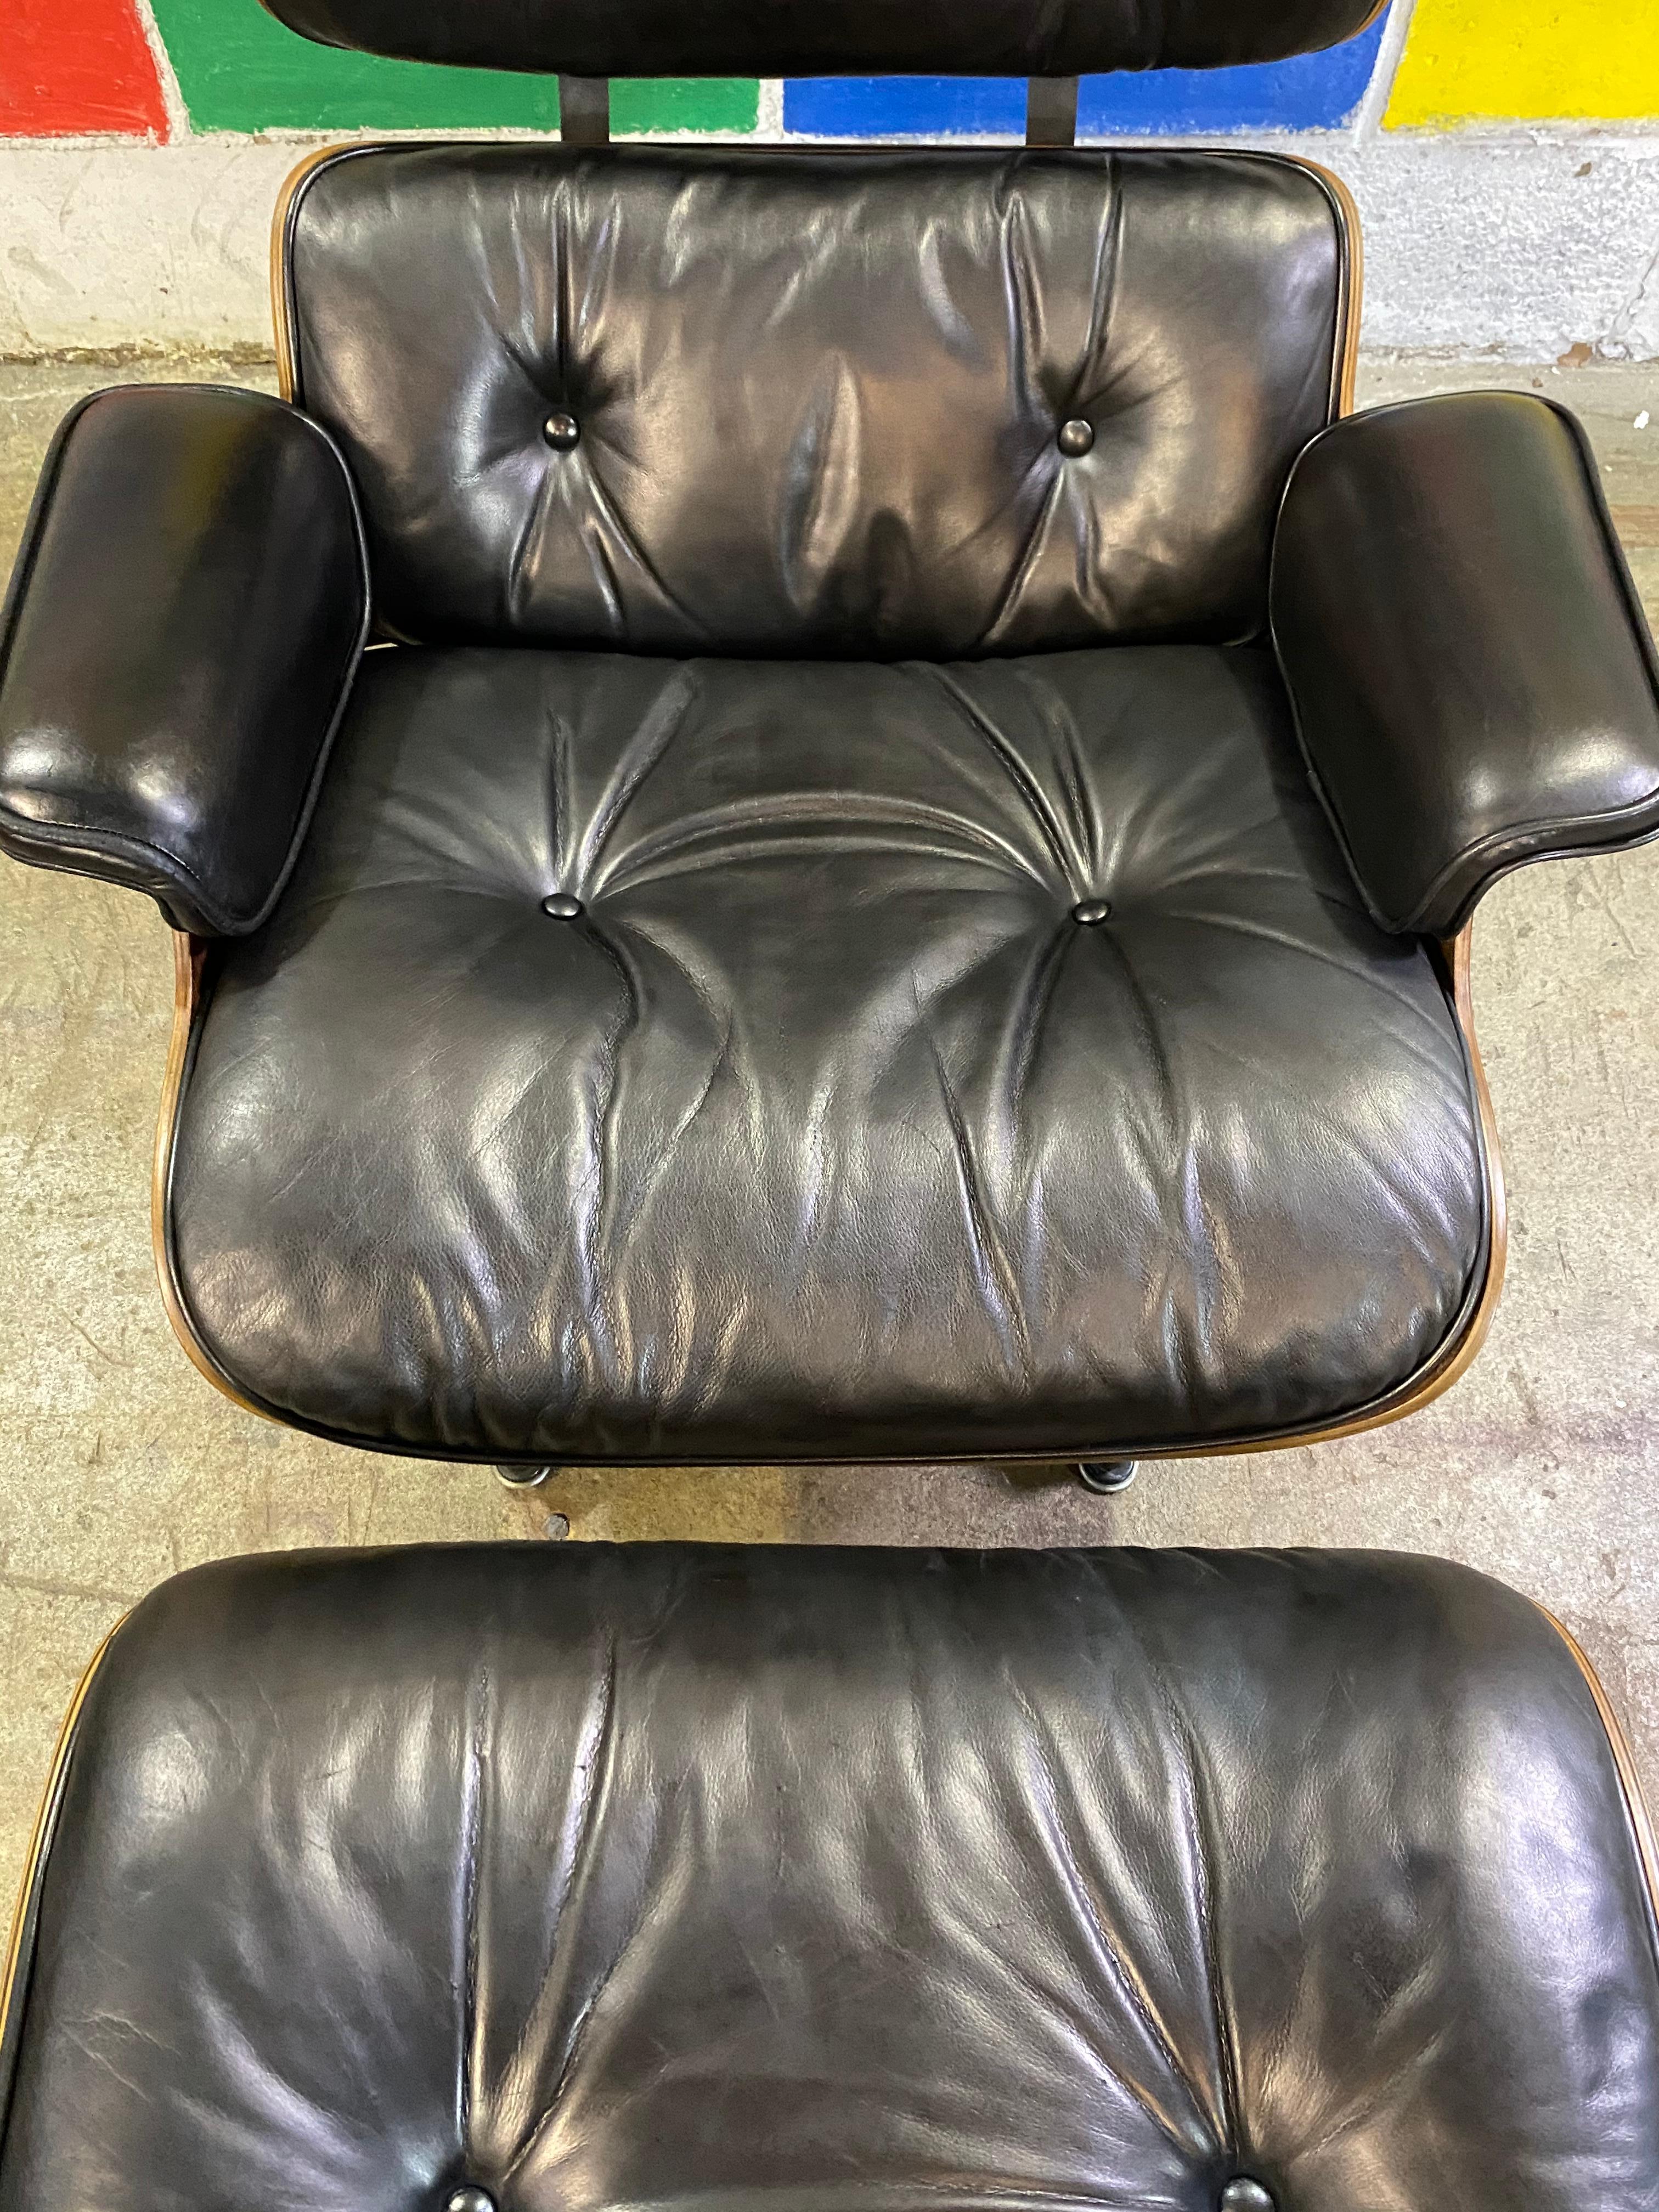 Gorgeous example of the classic Eames chair and ottoman. Signed guaranteed authentic vintage Herman Miller production. Wood has been cleaned and oiled. Leather in very good condition with no dryness or holes. Chair smoothly and chair and base retain